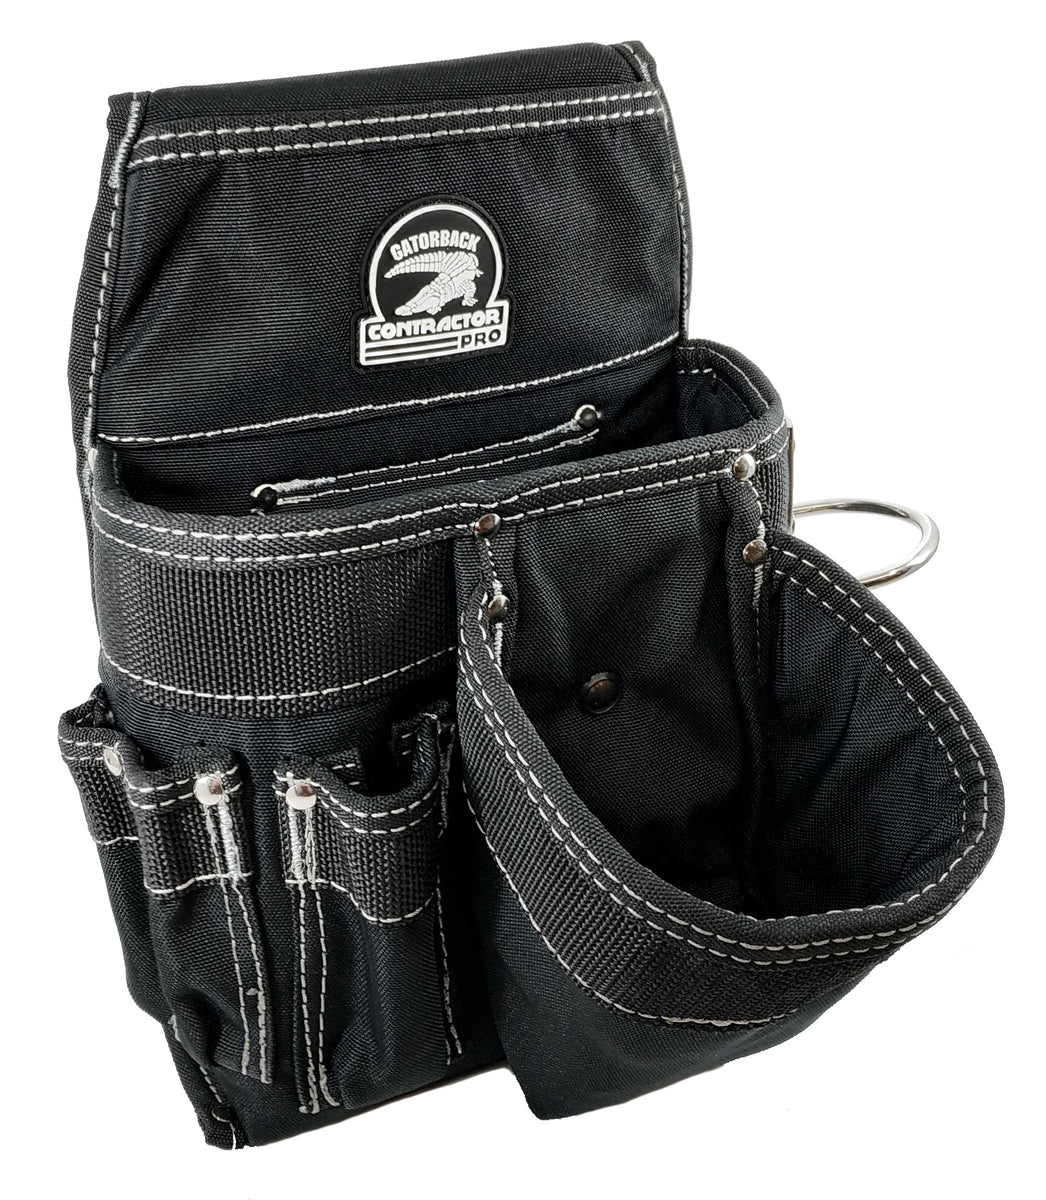 AMERICAN WORK PRODUCTS SPLIT LEATHER CARPENTER TOOL BELT BAG POUCH  LS-490-603-X